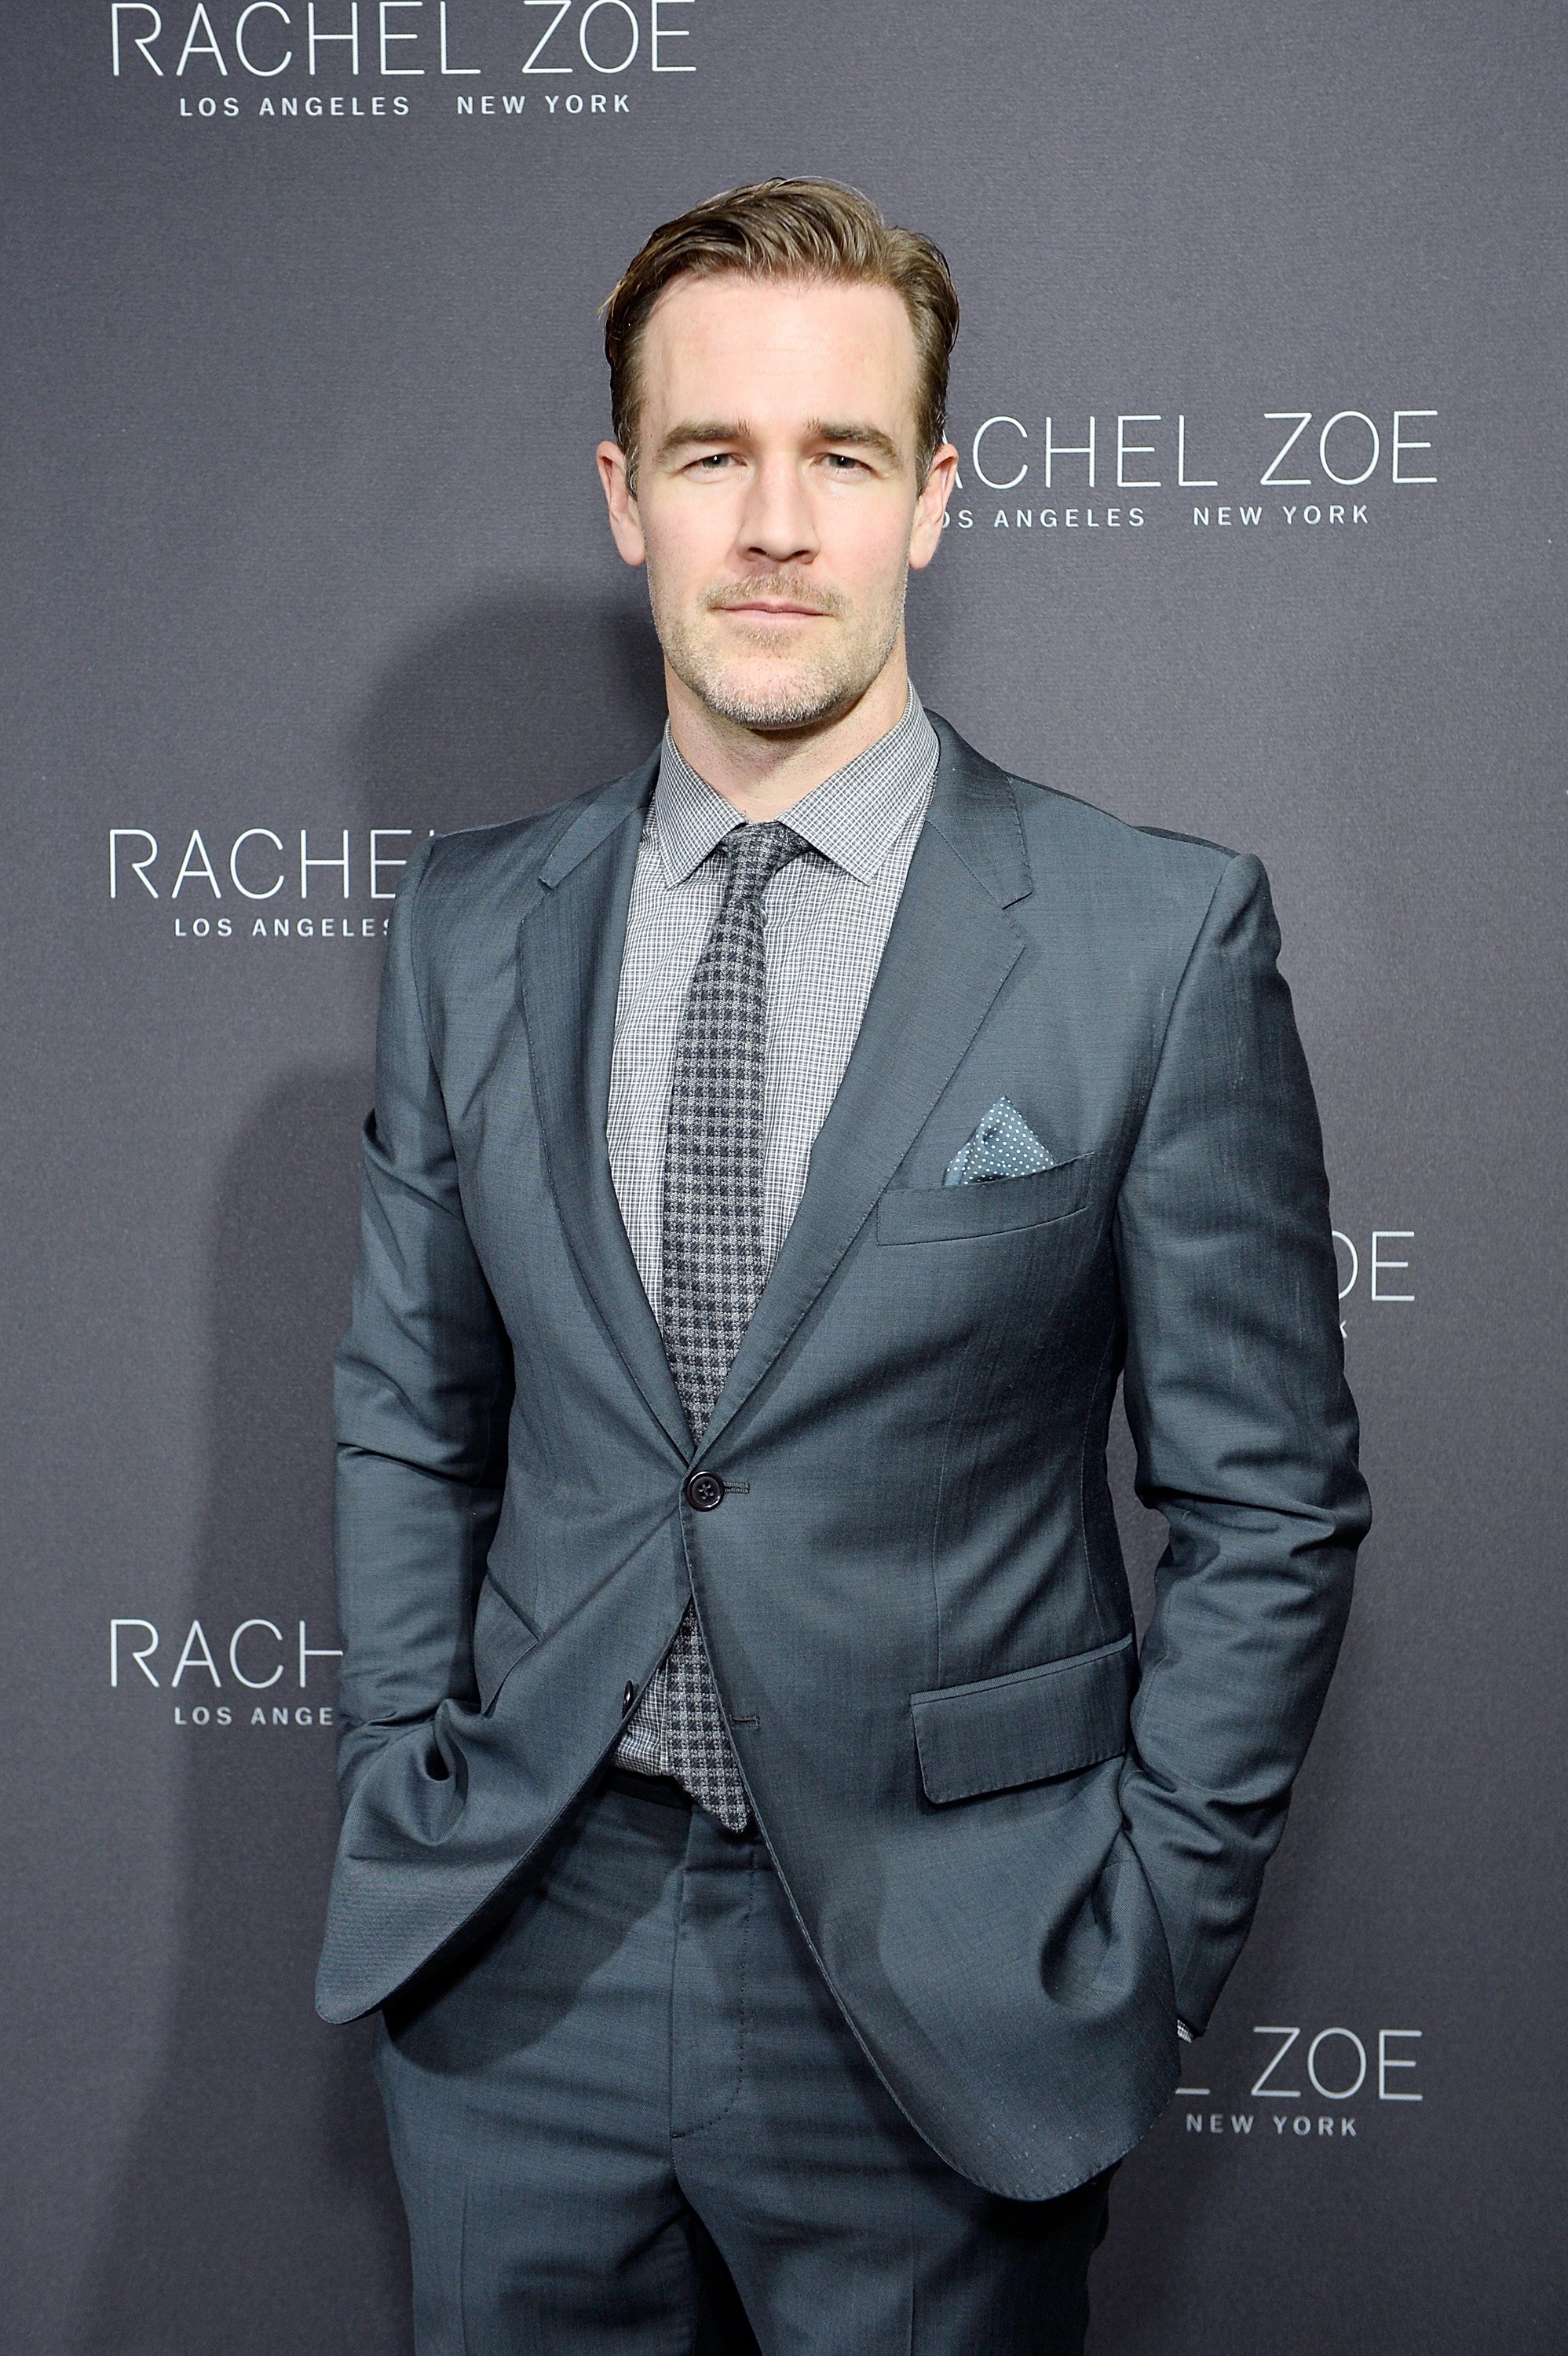 James Van Der Beek at Sunset Tower Hotel on February 6, 2017 in West Hollywood, California | Photo: Getty Images